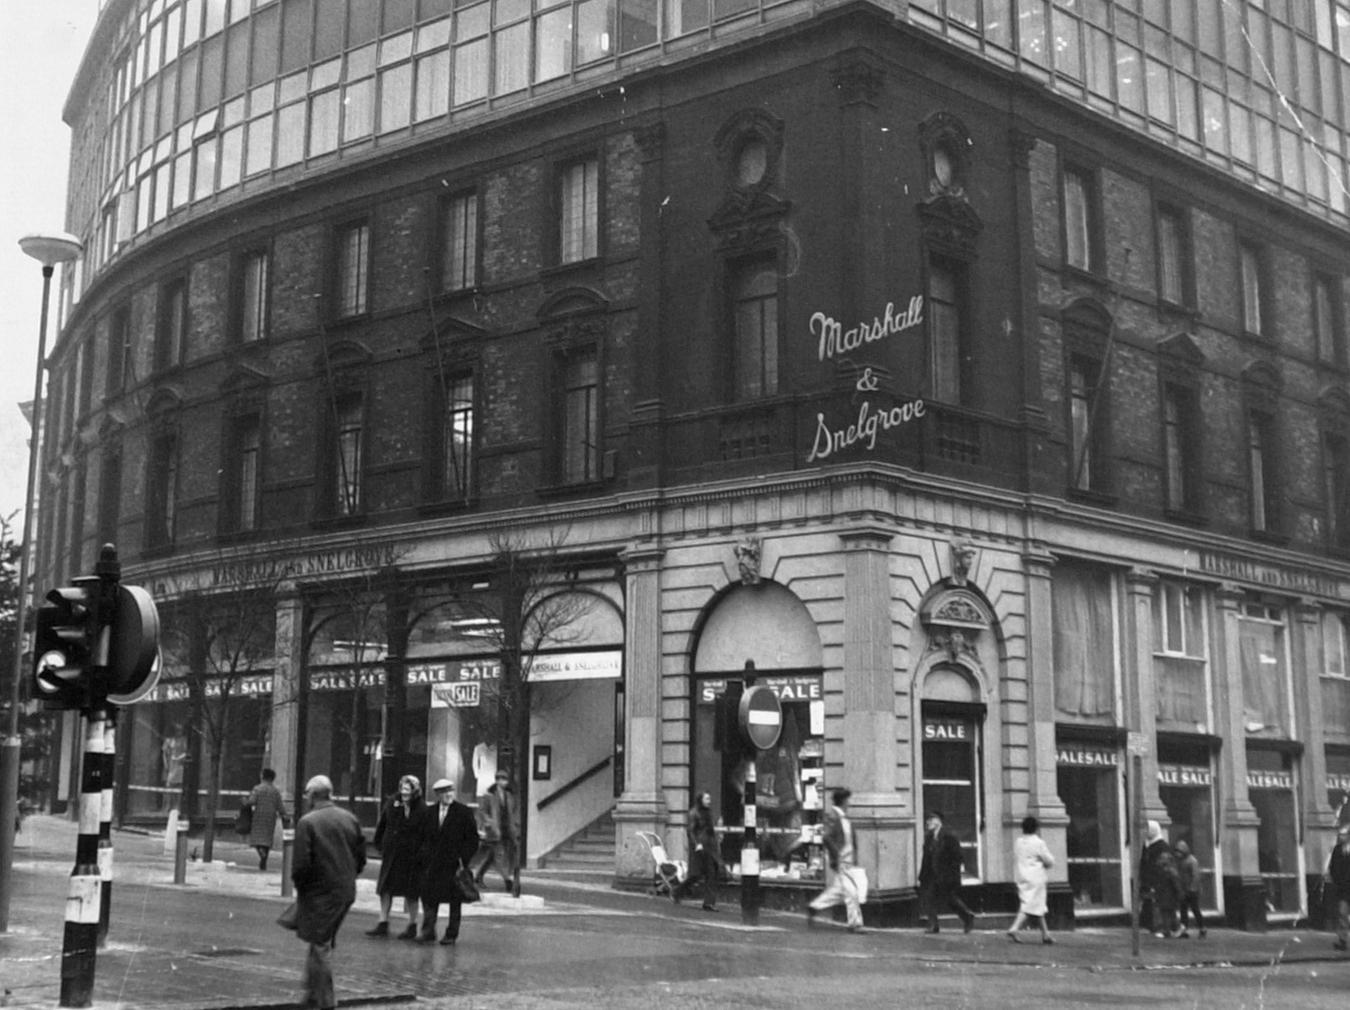 Marshall & Snelgrove at the junction of Bond Street and Park Row was a Leeds staple for just over 100 years before closing in 1971, and many readers wish they could bring it back.